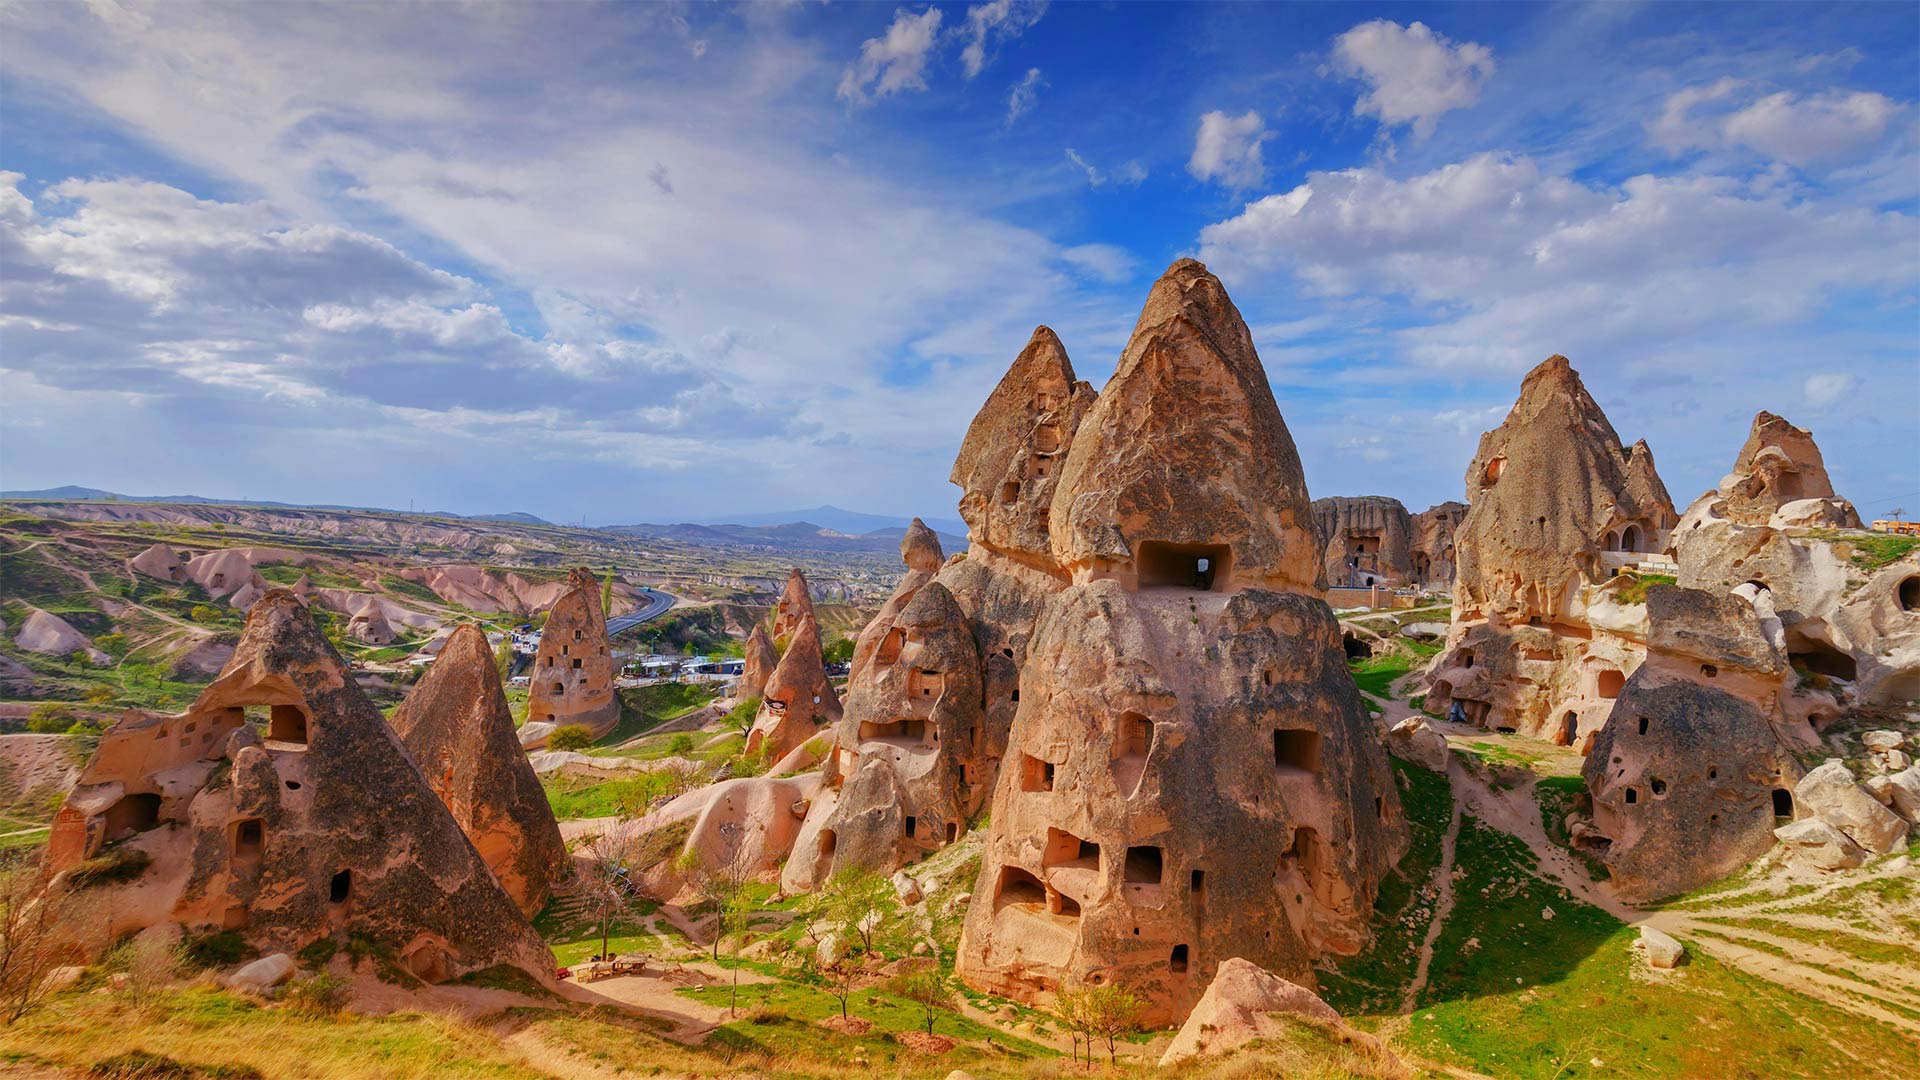 Bing image: And to think that I saw it in Cappadocia - Bing Wallpaper